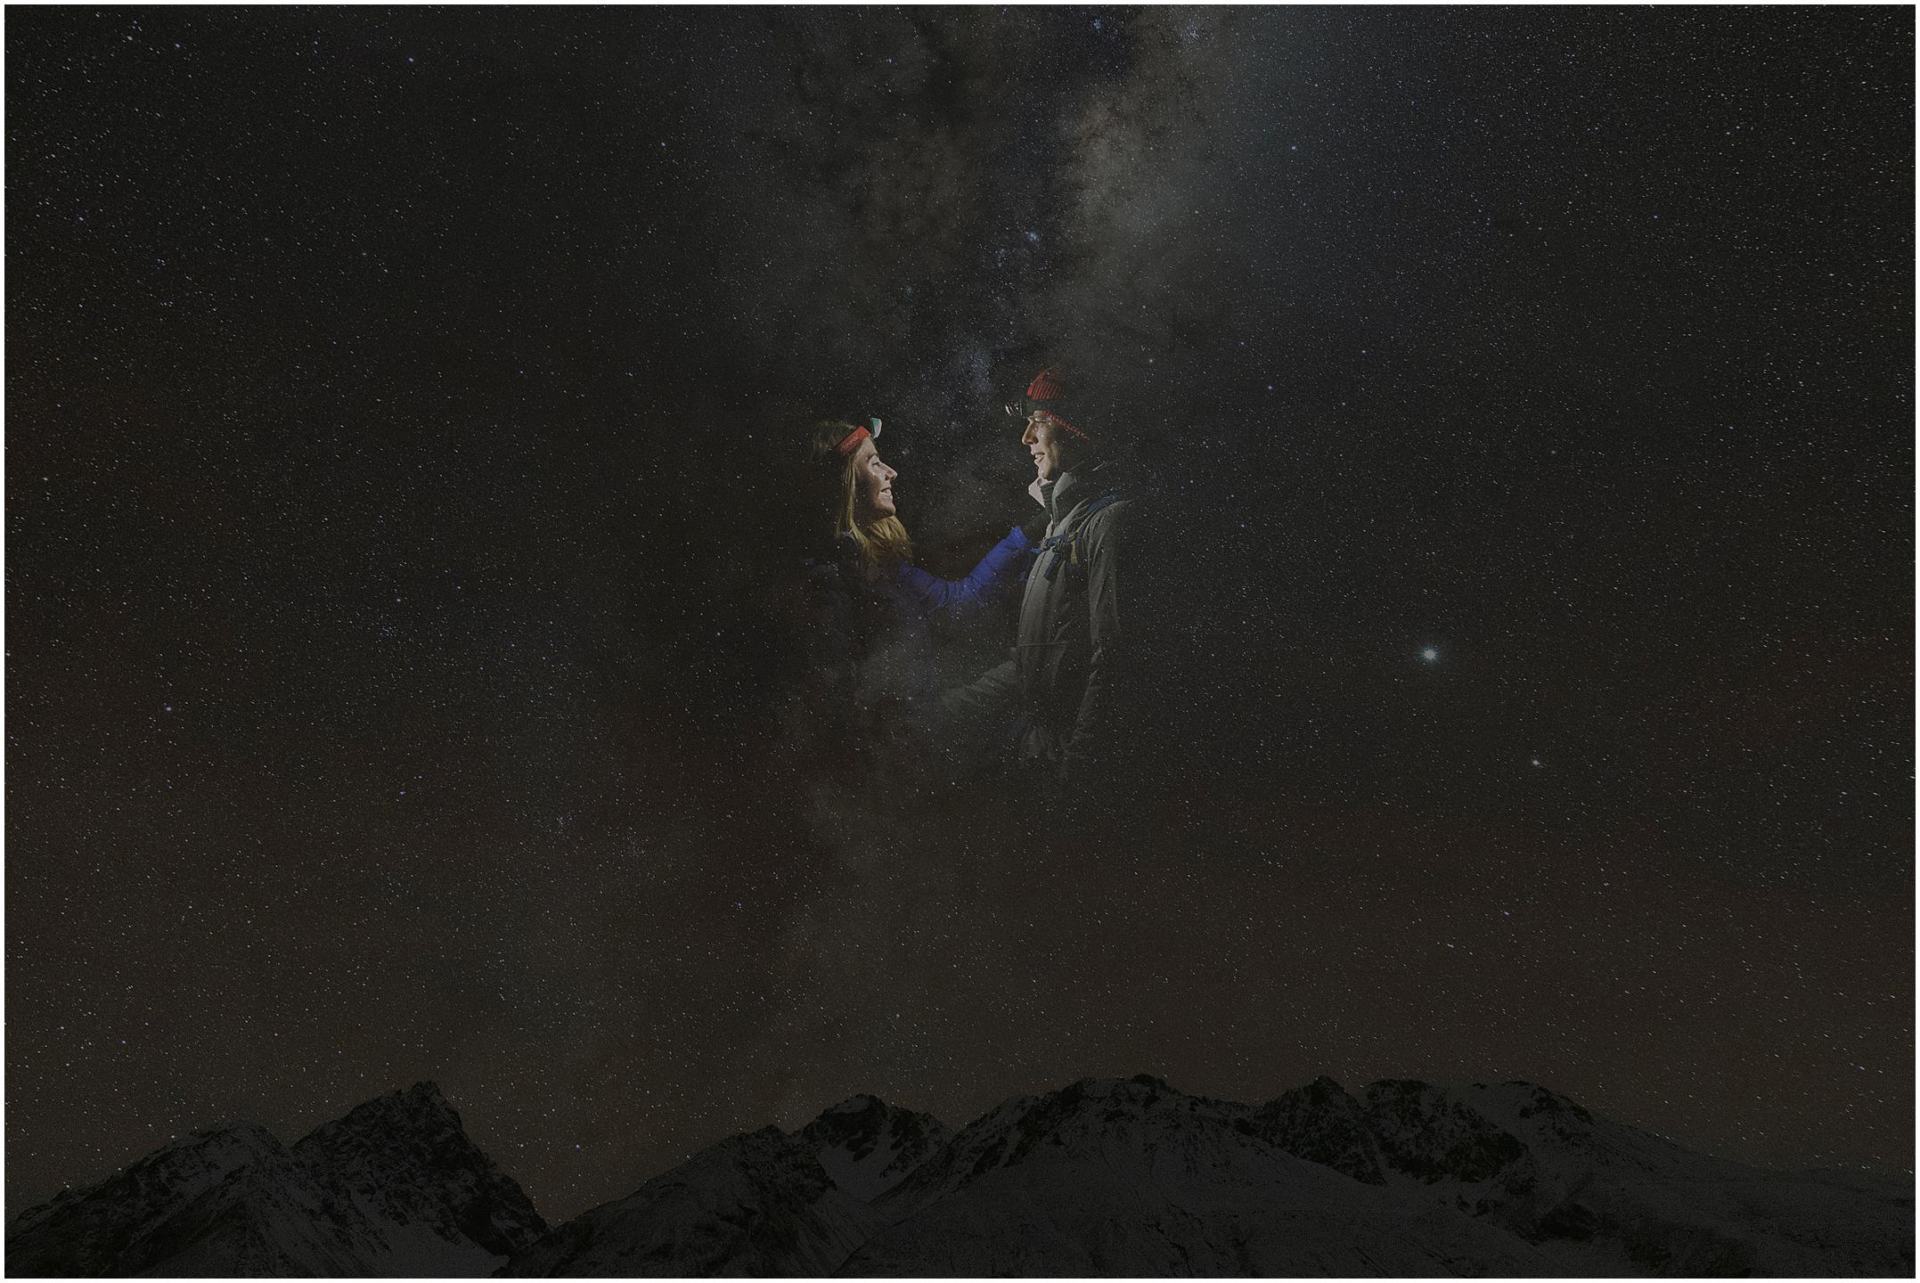 Charlotte Kiri Photography - Engagement Photography of a happy couple wearing explorer outfits seemingly drifting among the celestial milky way in the sky with a silhouette of mountain tops below in Wanaka, New Zealand